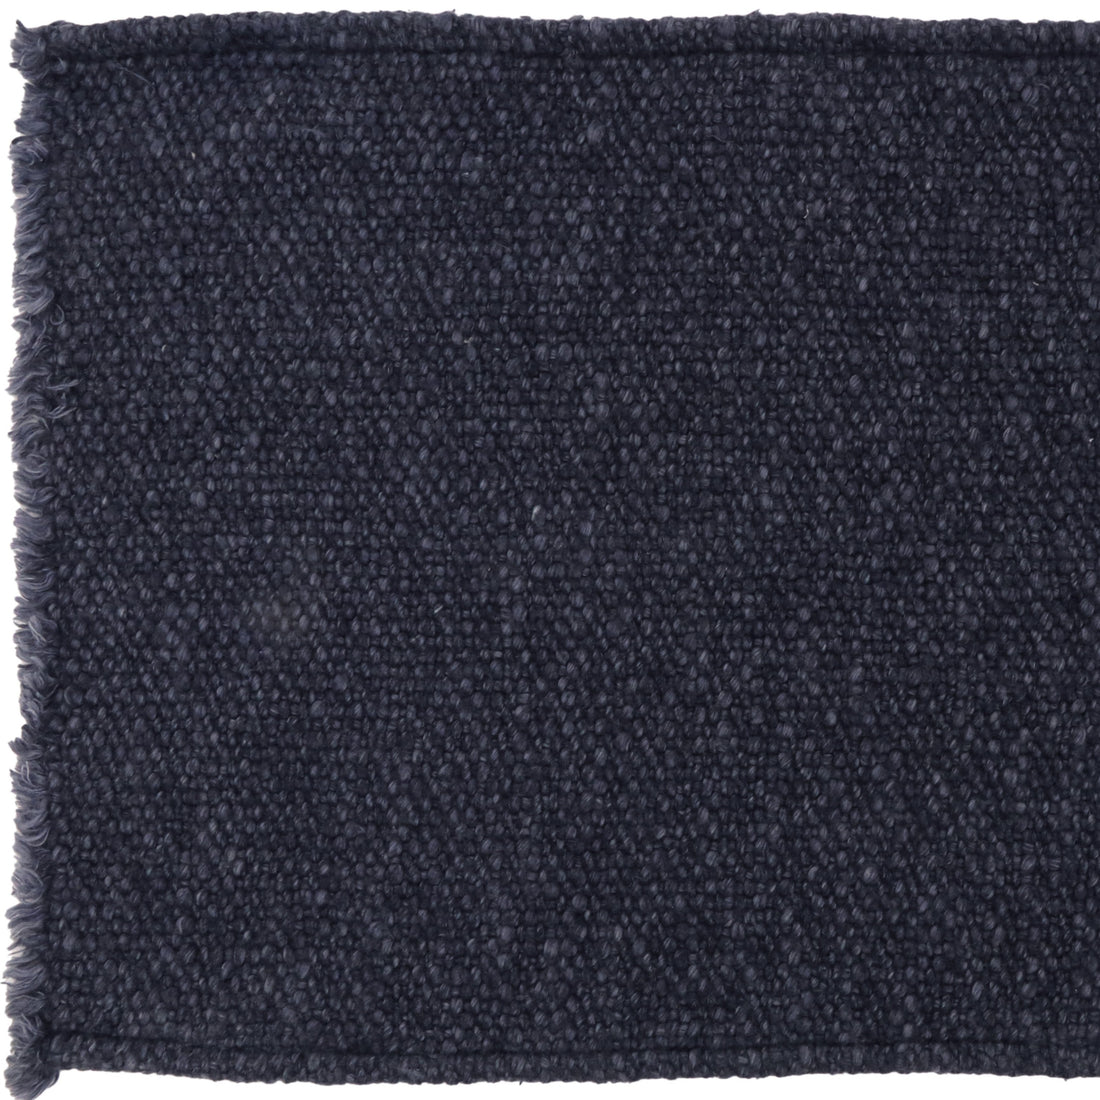 Porter Placemats, Navy, Set Of 4